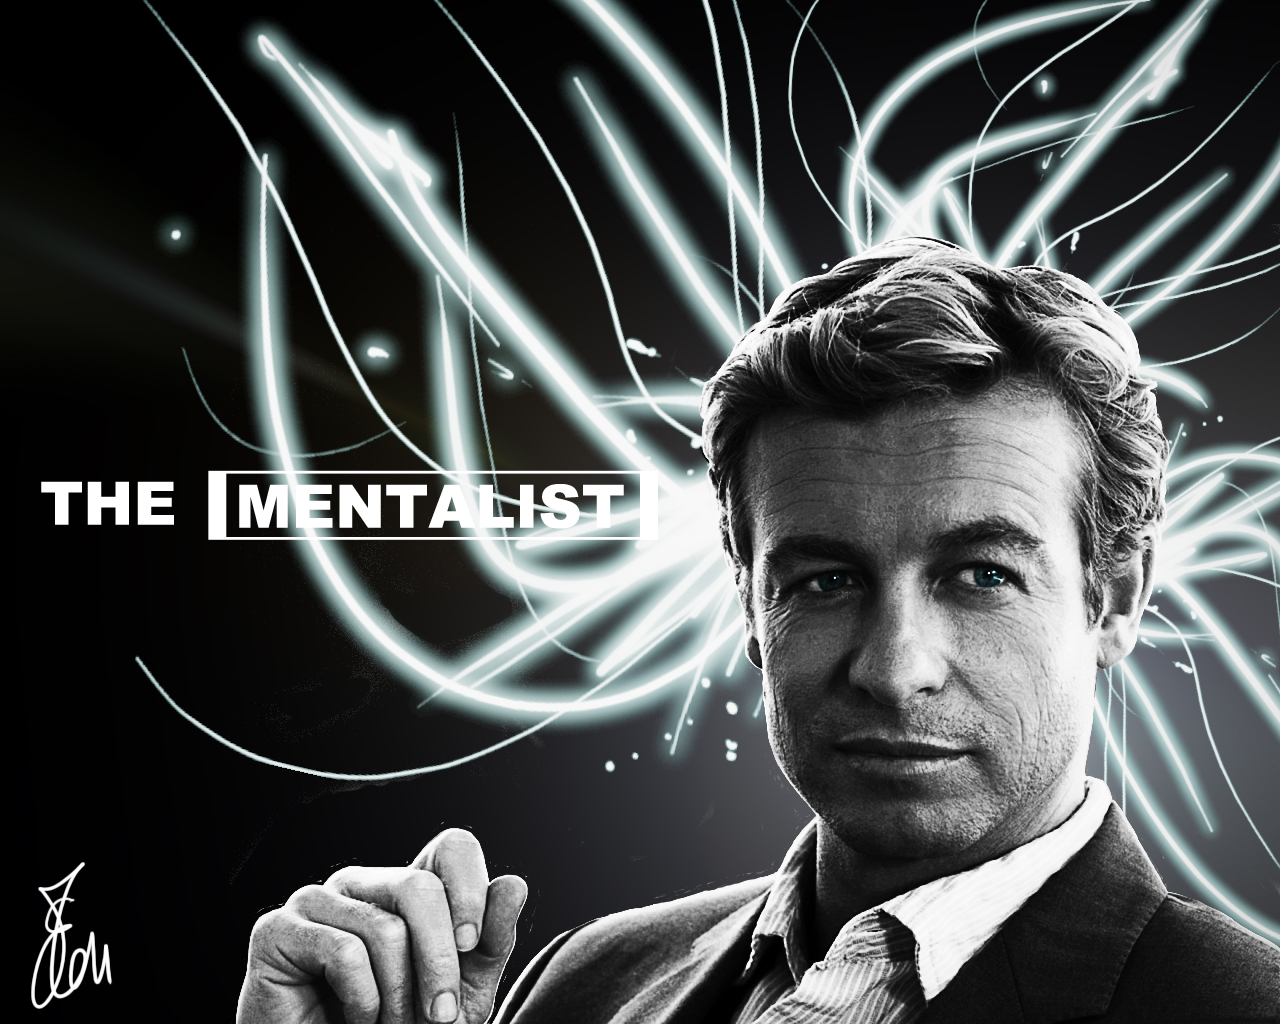 the mentalist, tv show